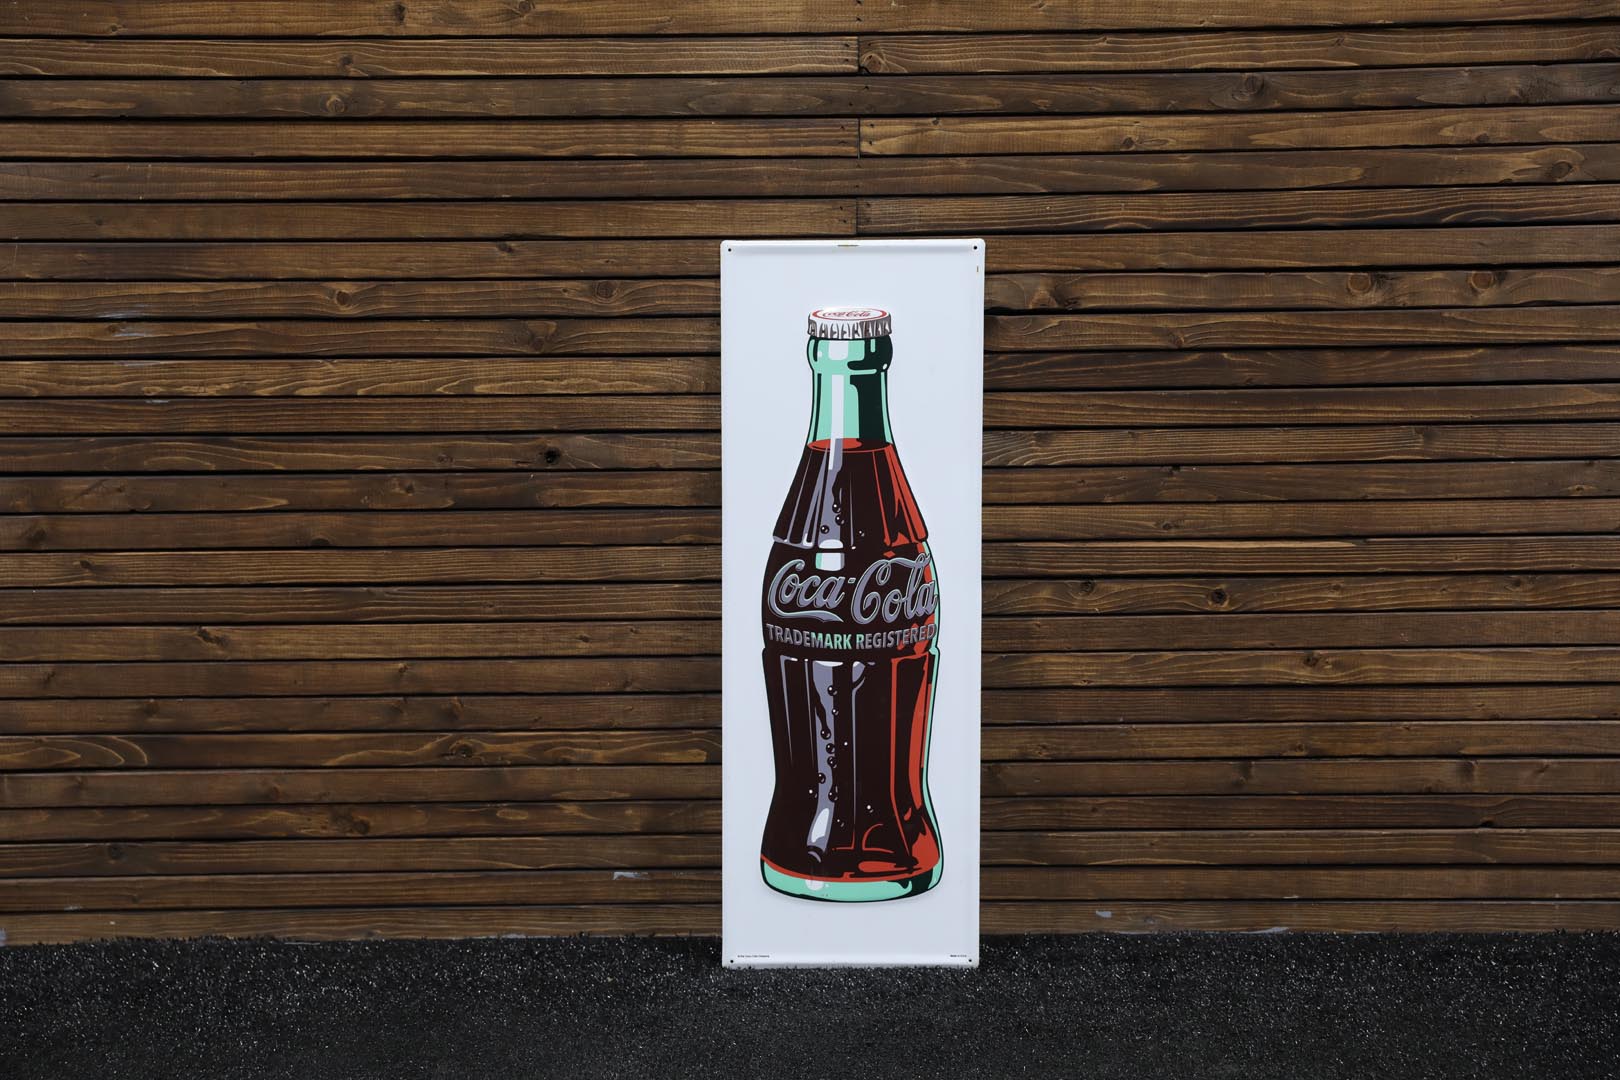  1960s Coca-Cola Bottle Embosse d Tin Sign - Small 